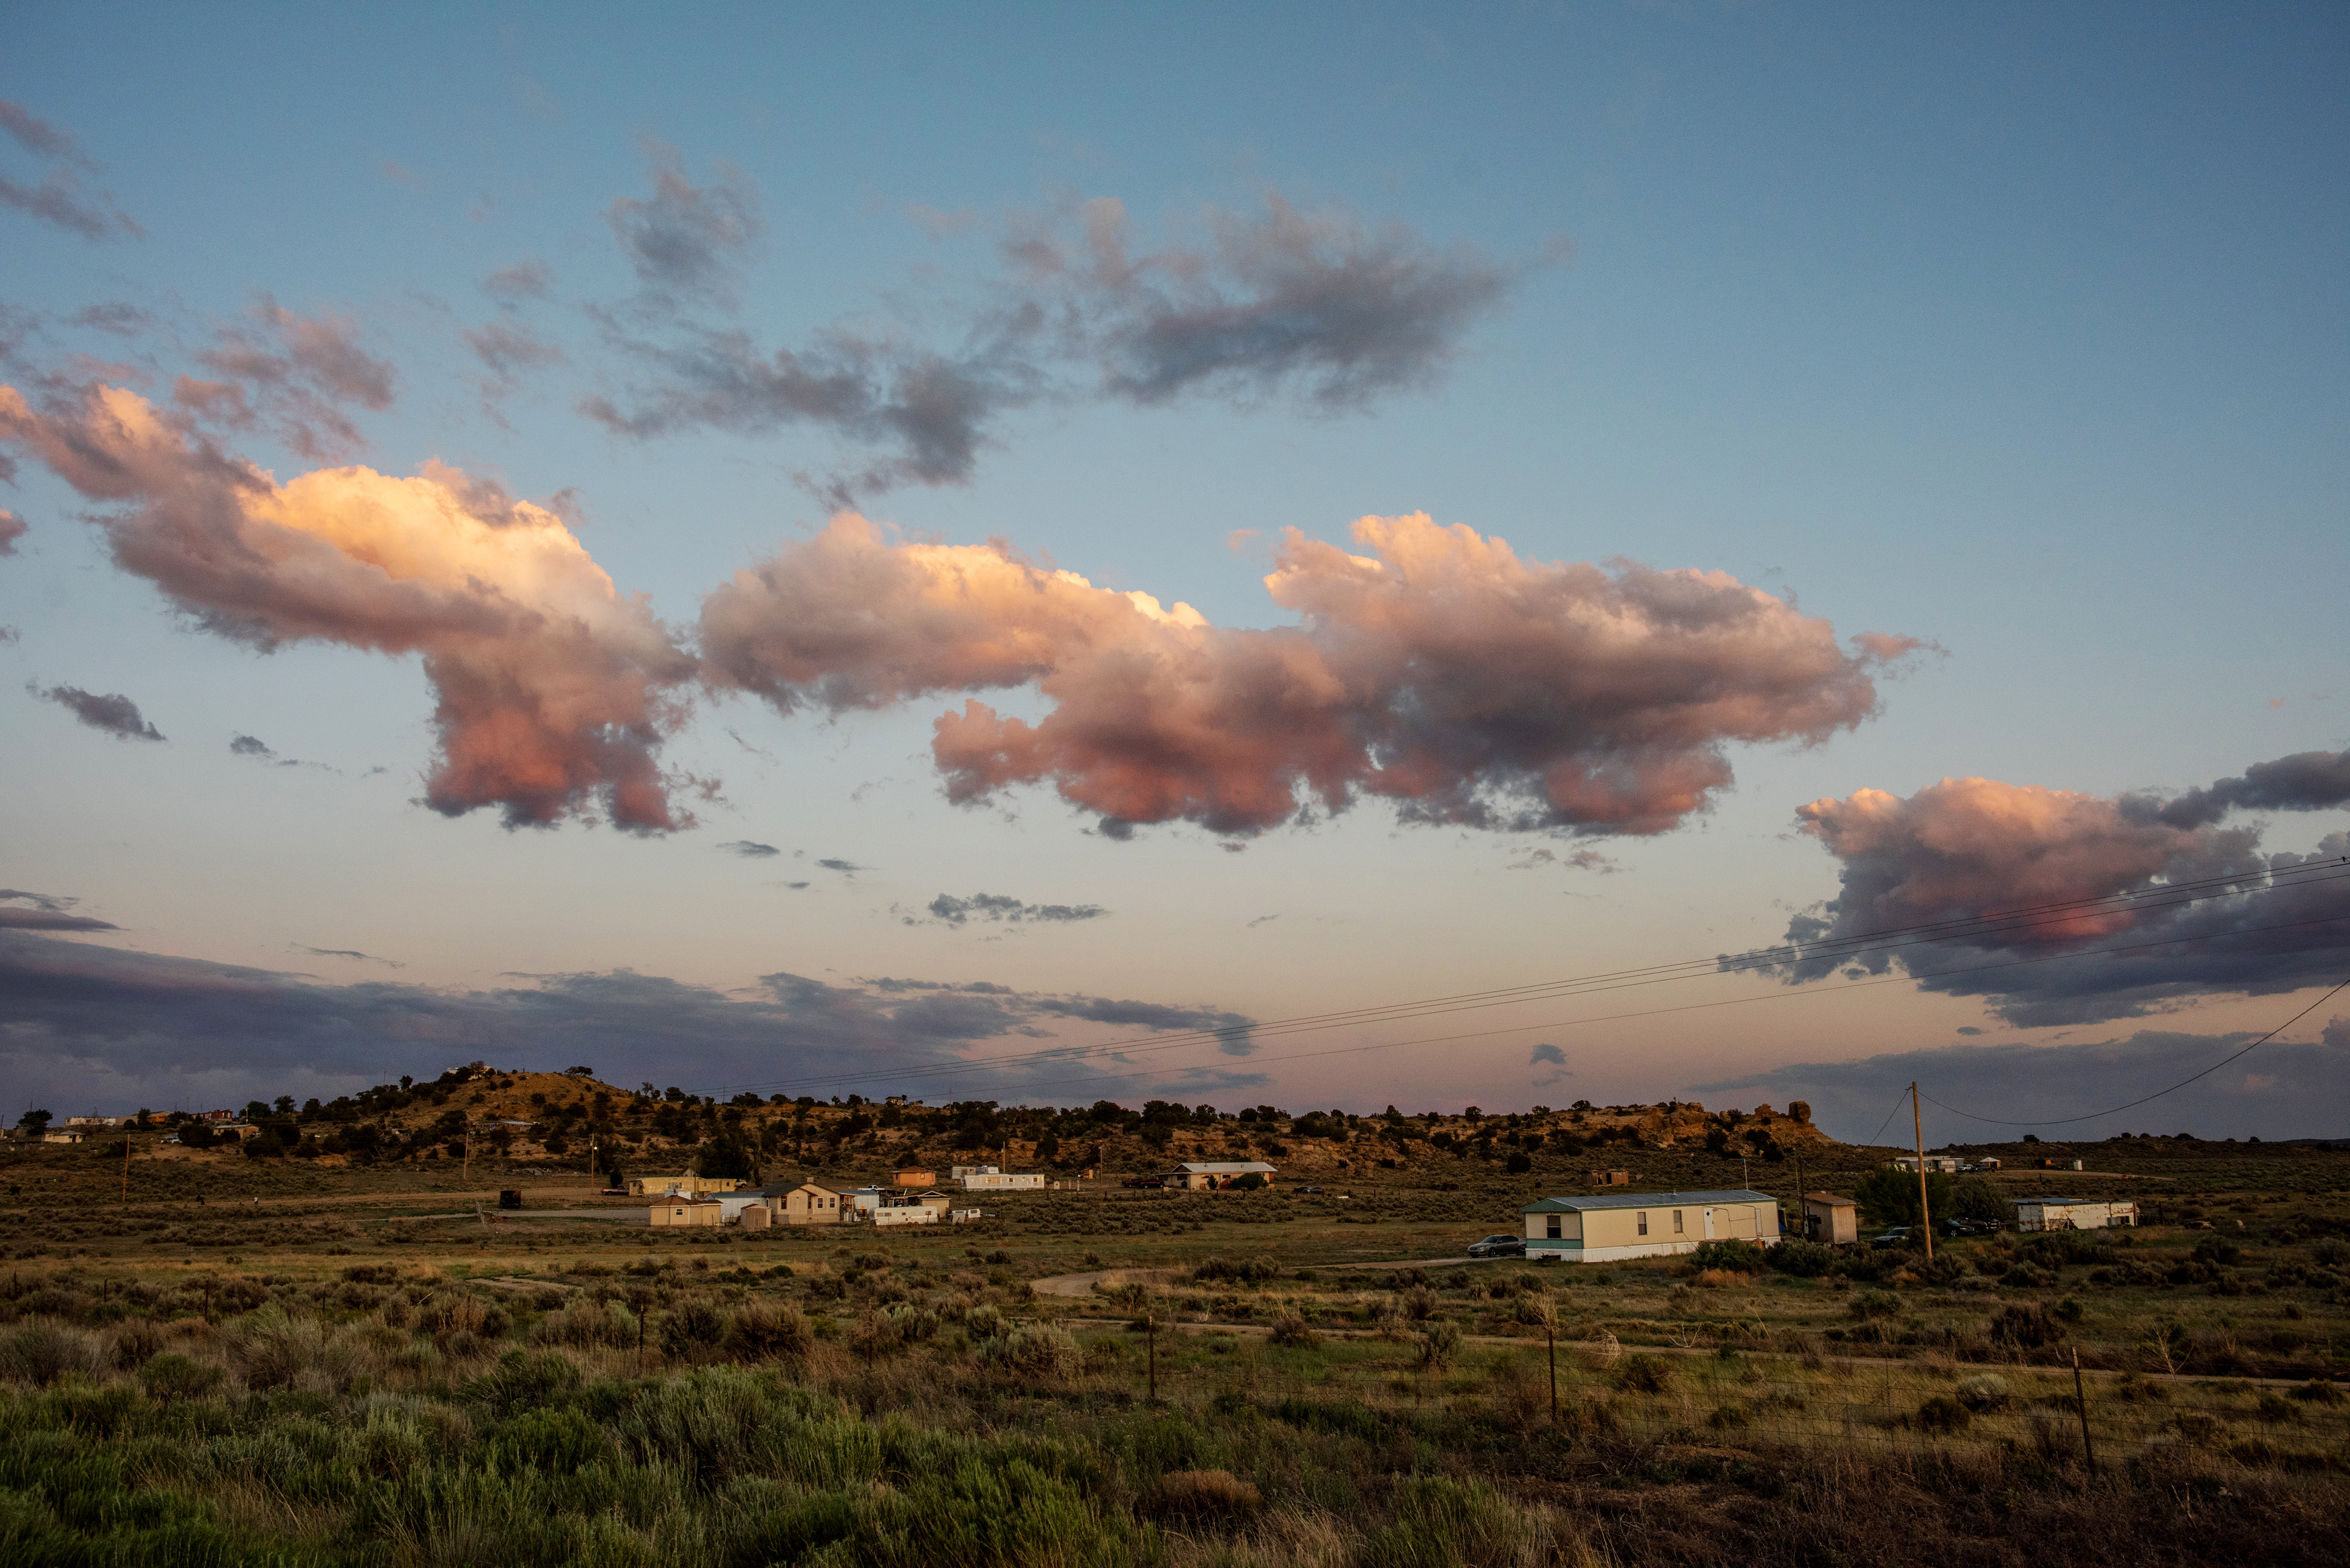 Clouds at sunset, lit from above and floating over the Navajo Nation